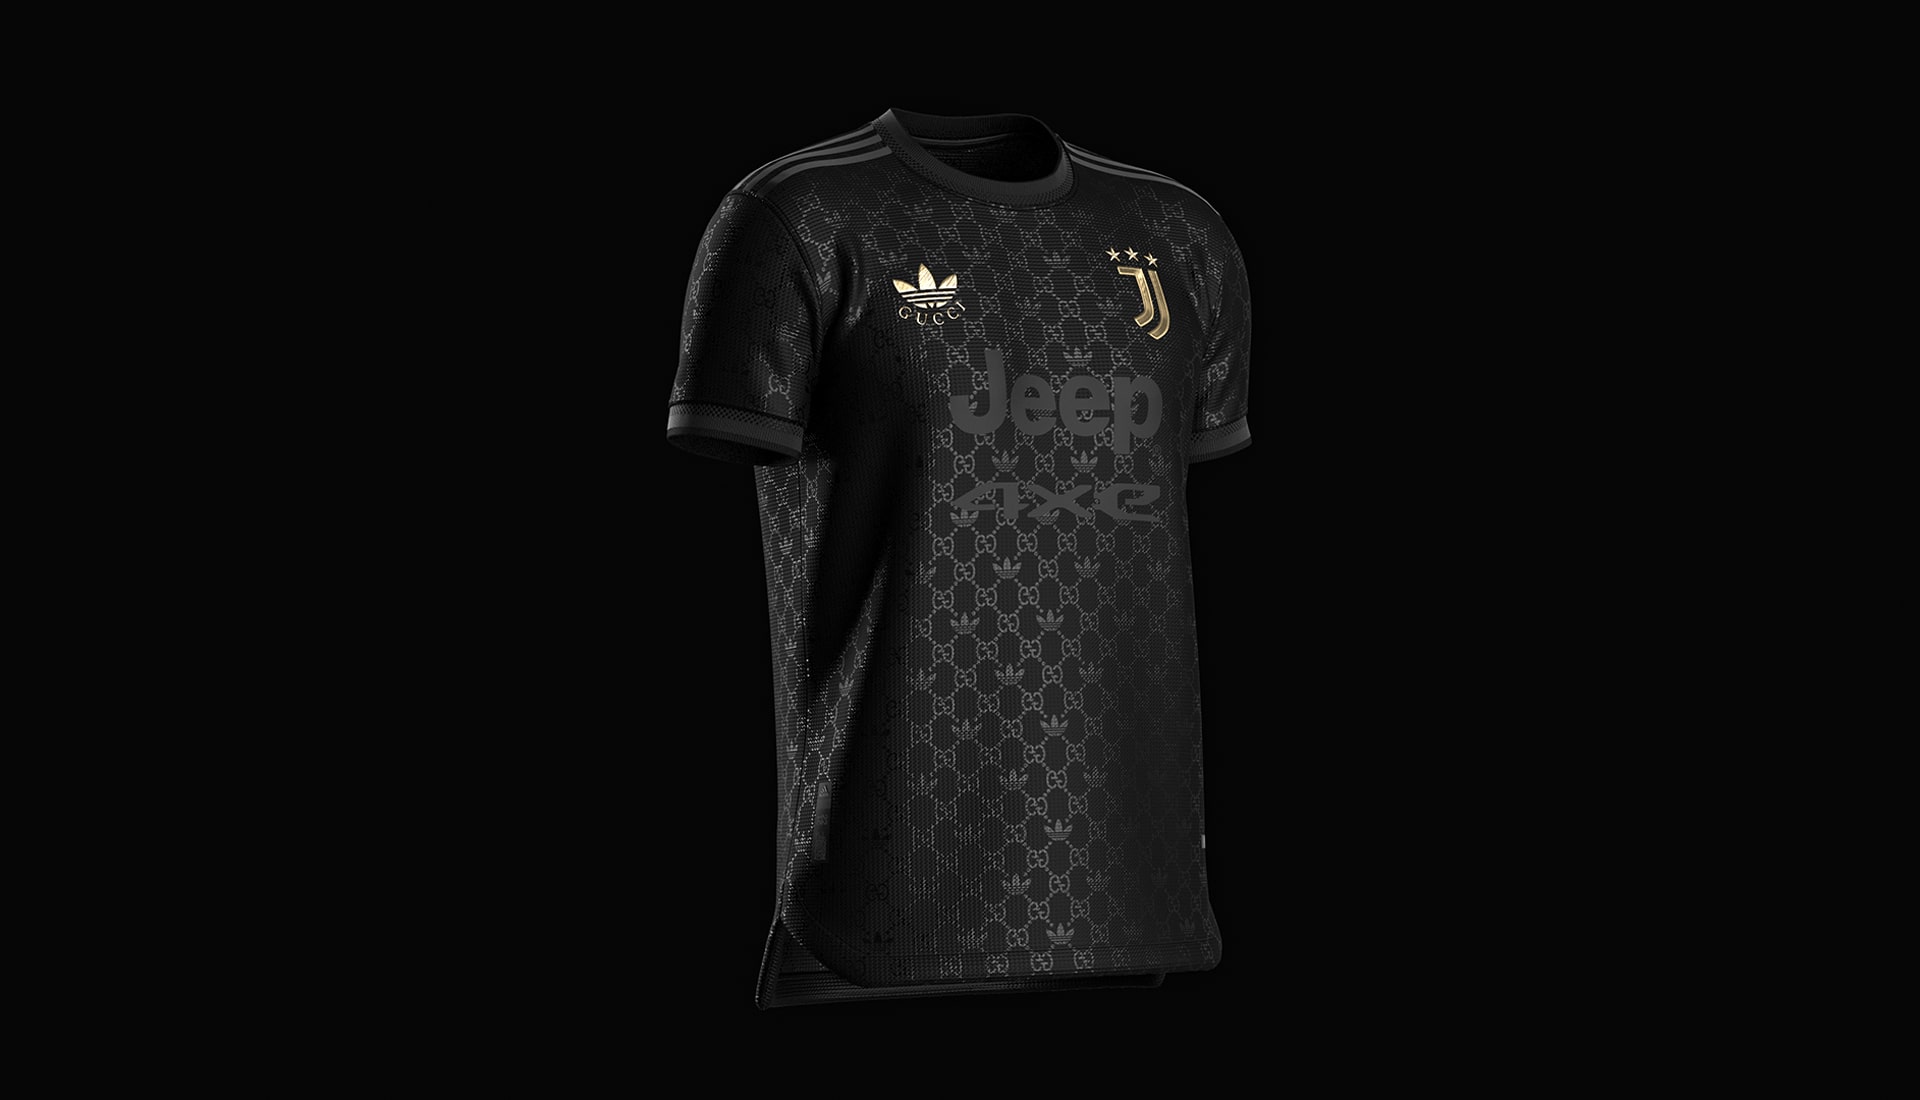 SETTPACE Imagines x adidas Jersey - SoccerBible